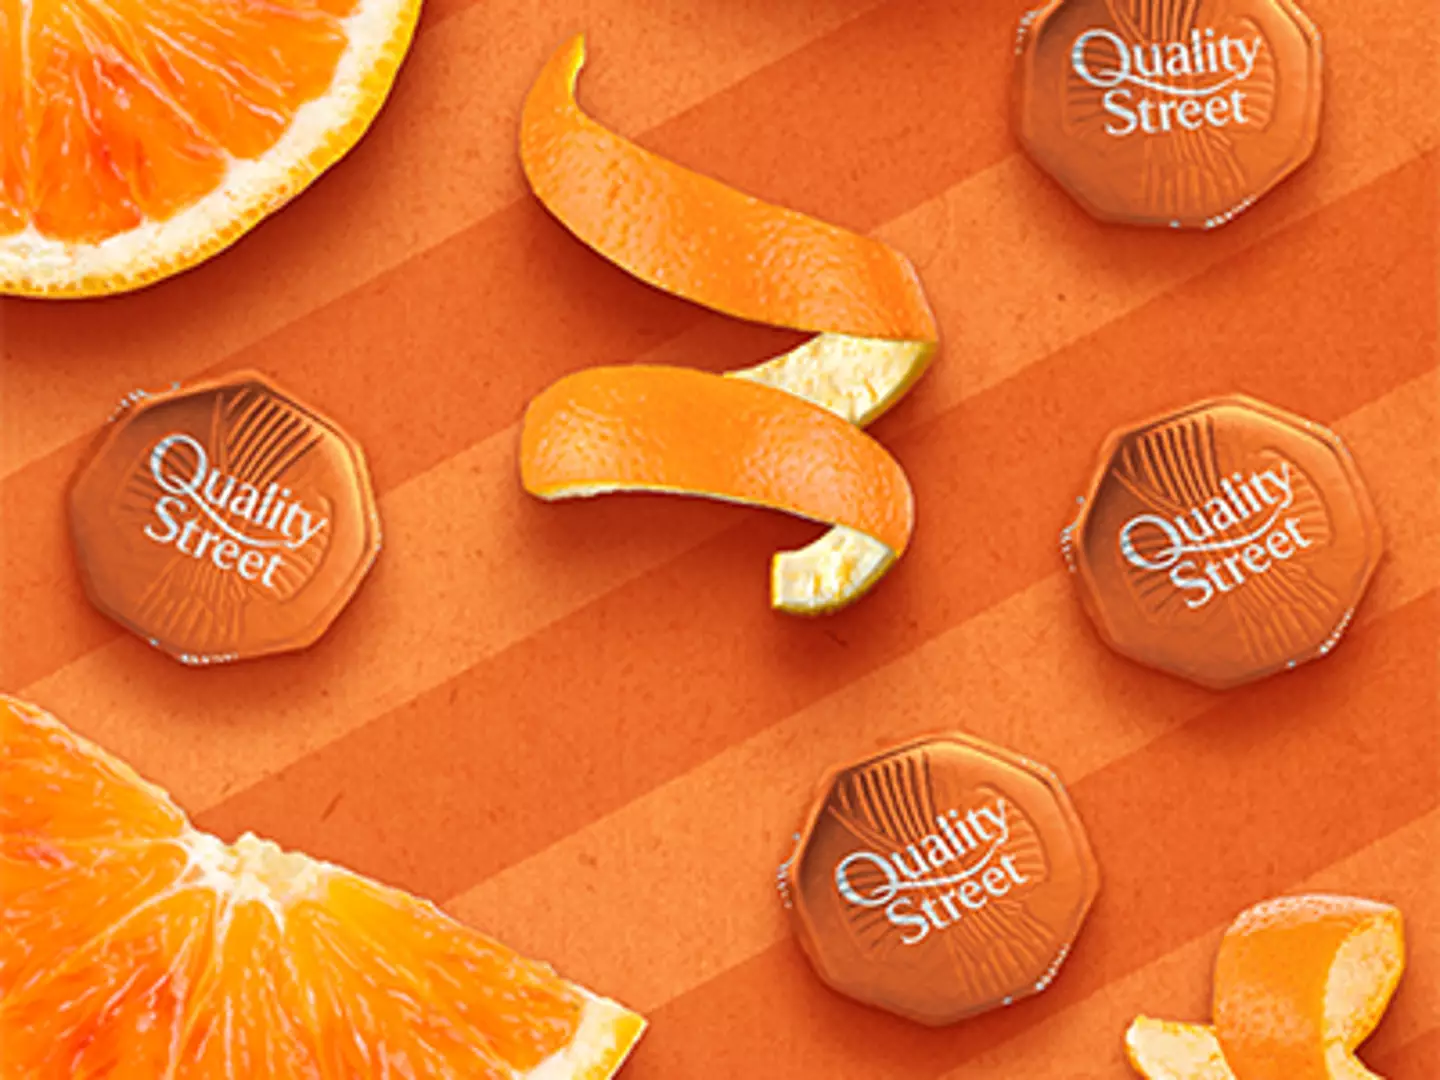 Orange Crunch is losing the traditional octagonal shape.